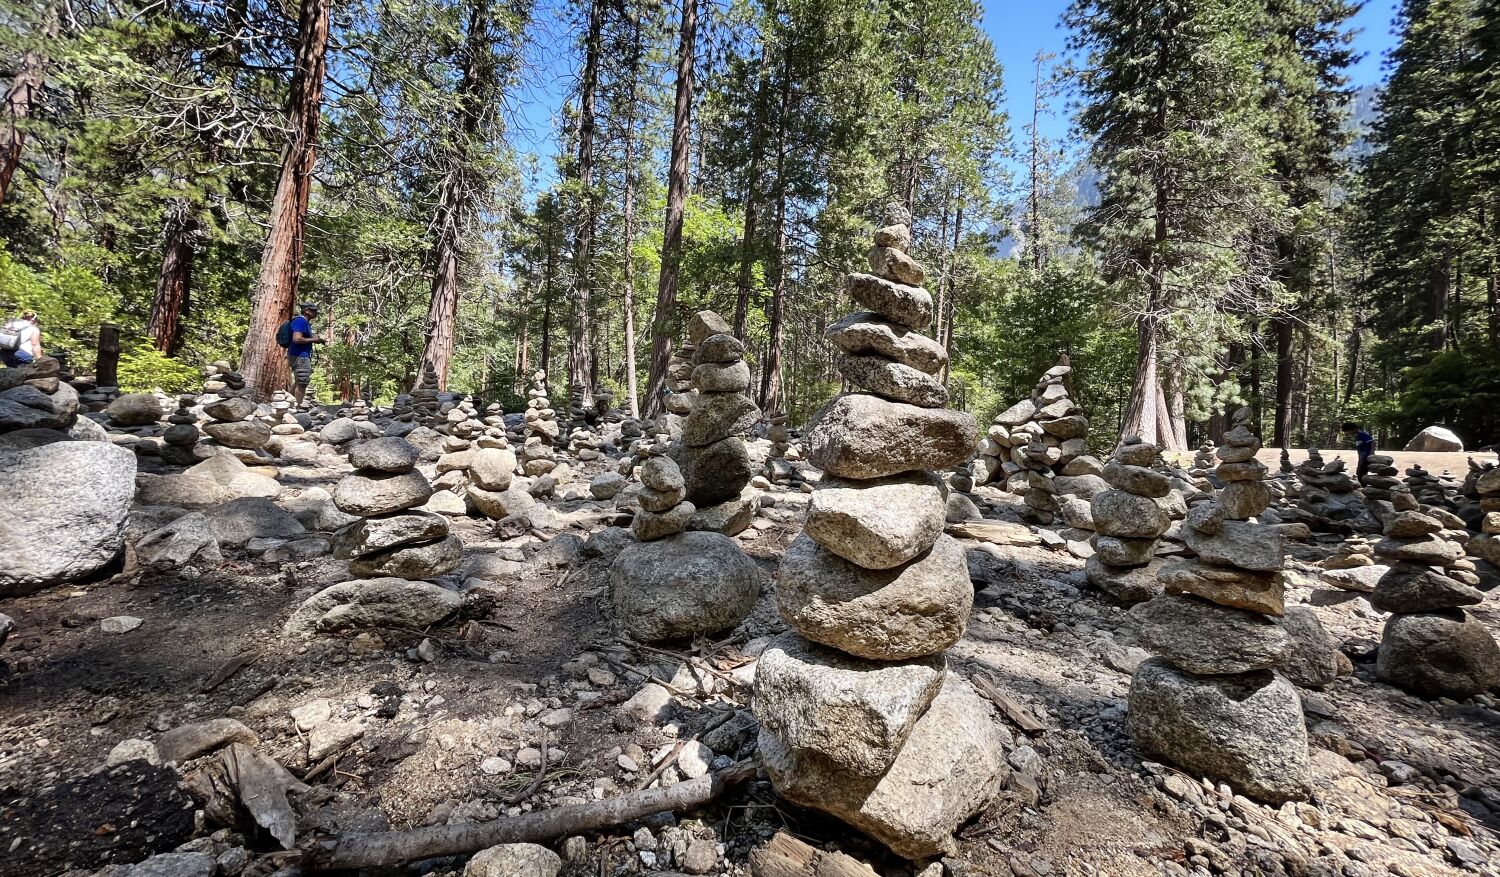 Have you seen these giant piles of rocks at Yosemite? Rangers say knock 'em down